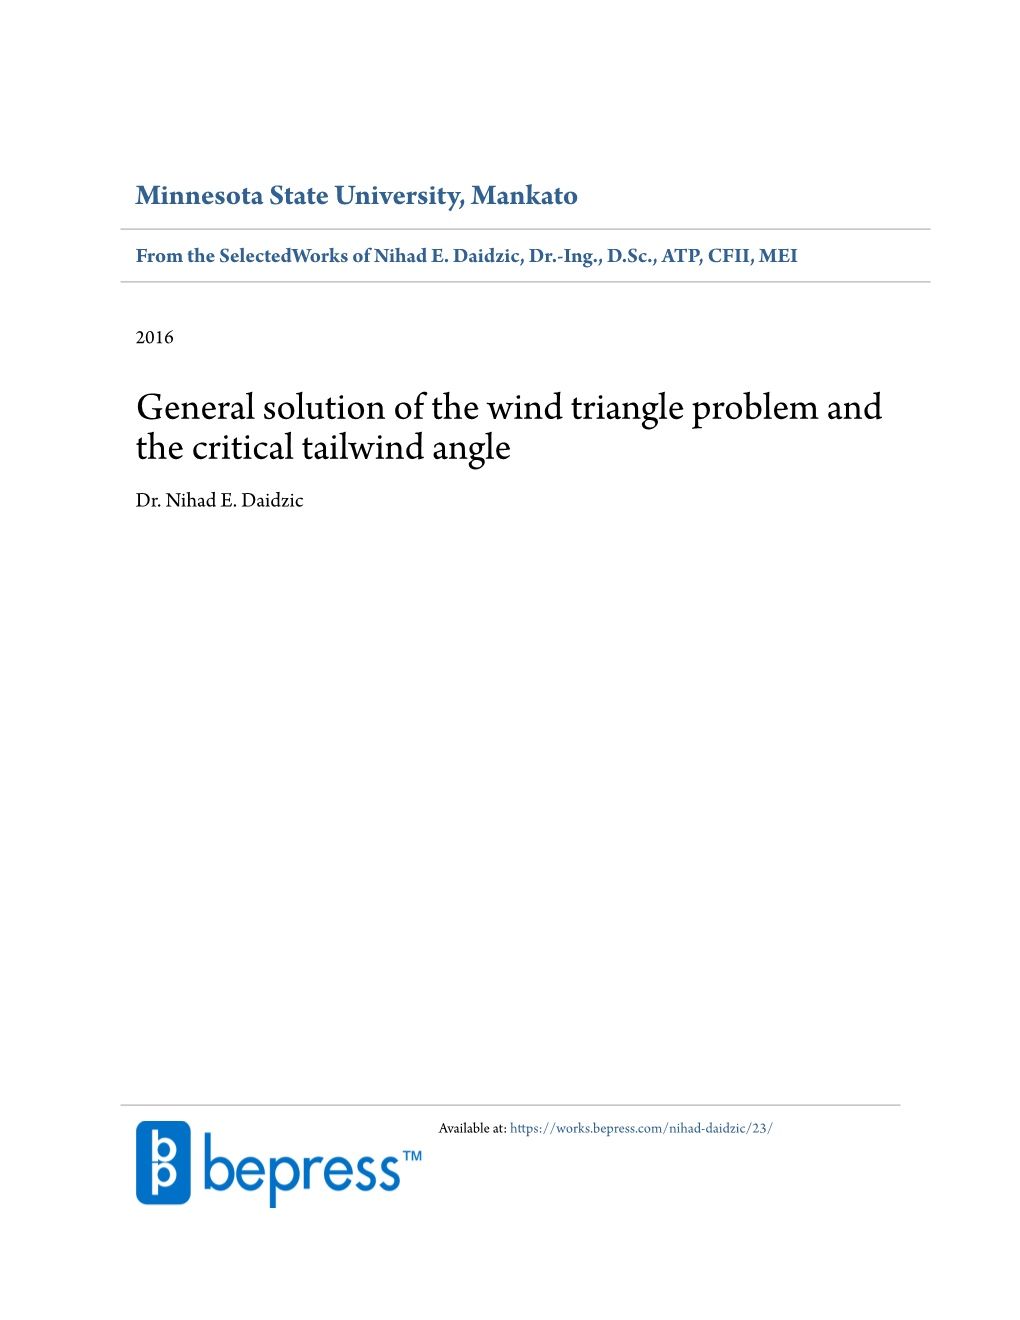 General Solution of the Wind Triangle Problem and the Critical Tailwind Angle Dr